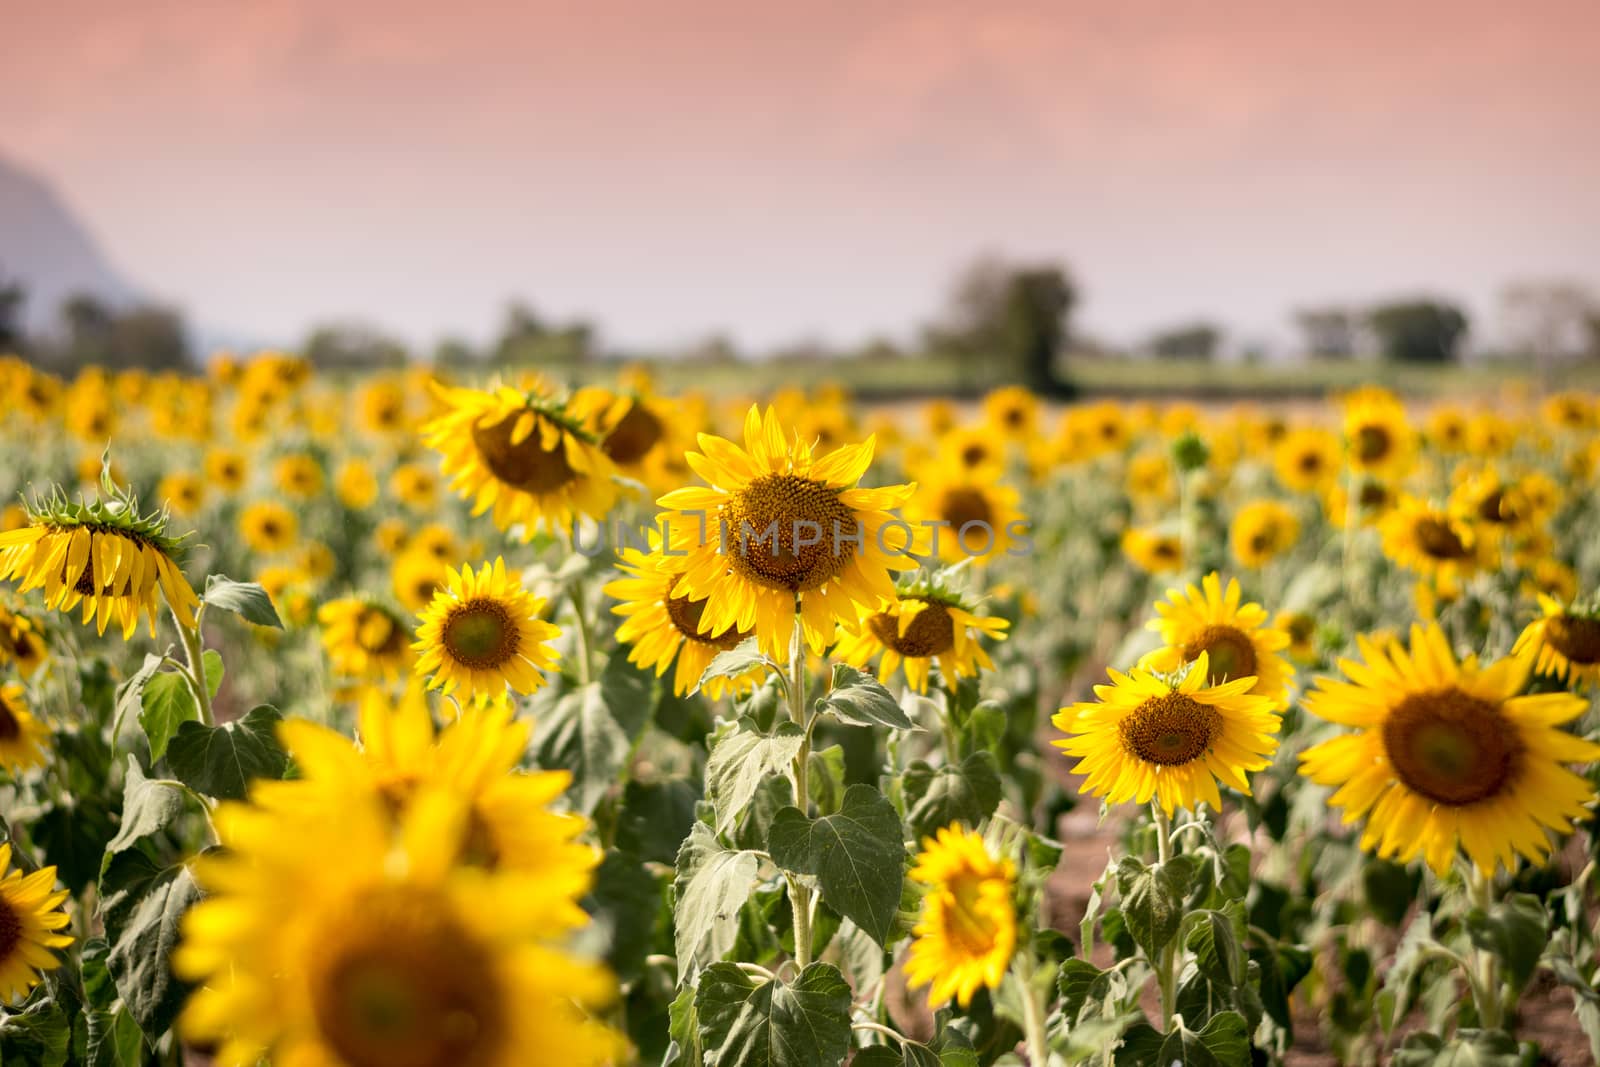 Field of sunflowers with blue sky. A sunflower field at sunset,with vintage filter,selective focus.